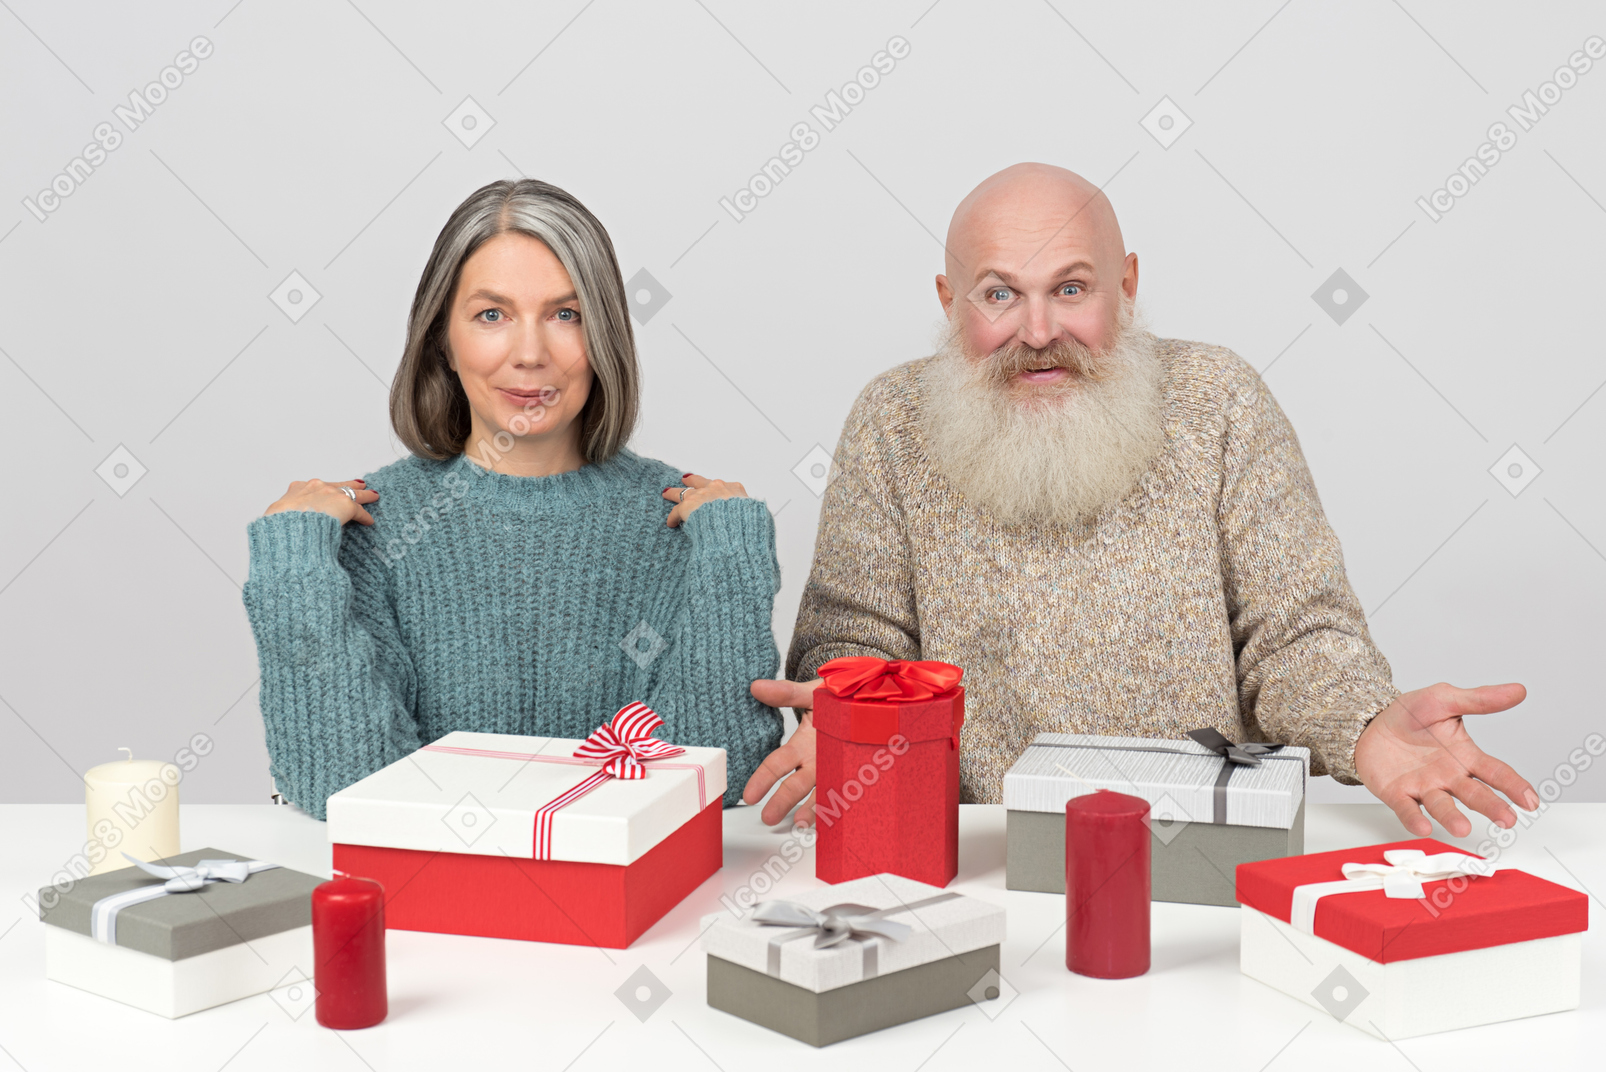 All those gifts for us?